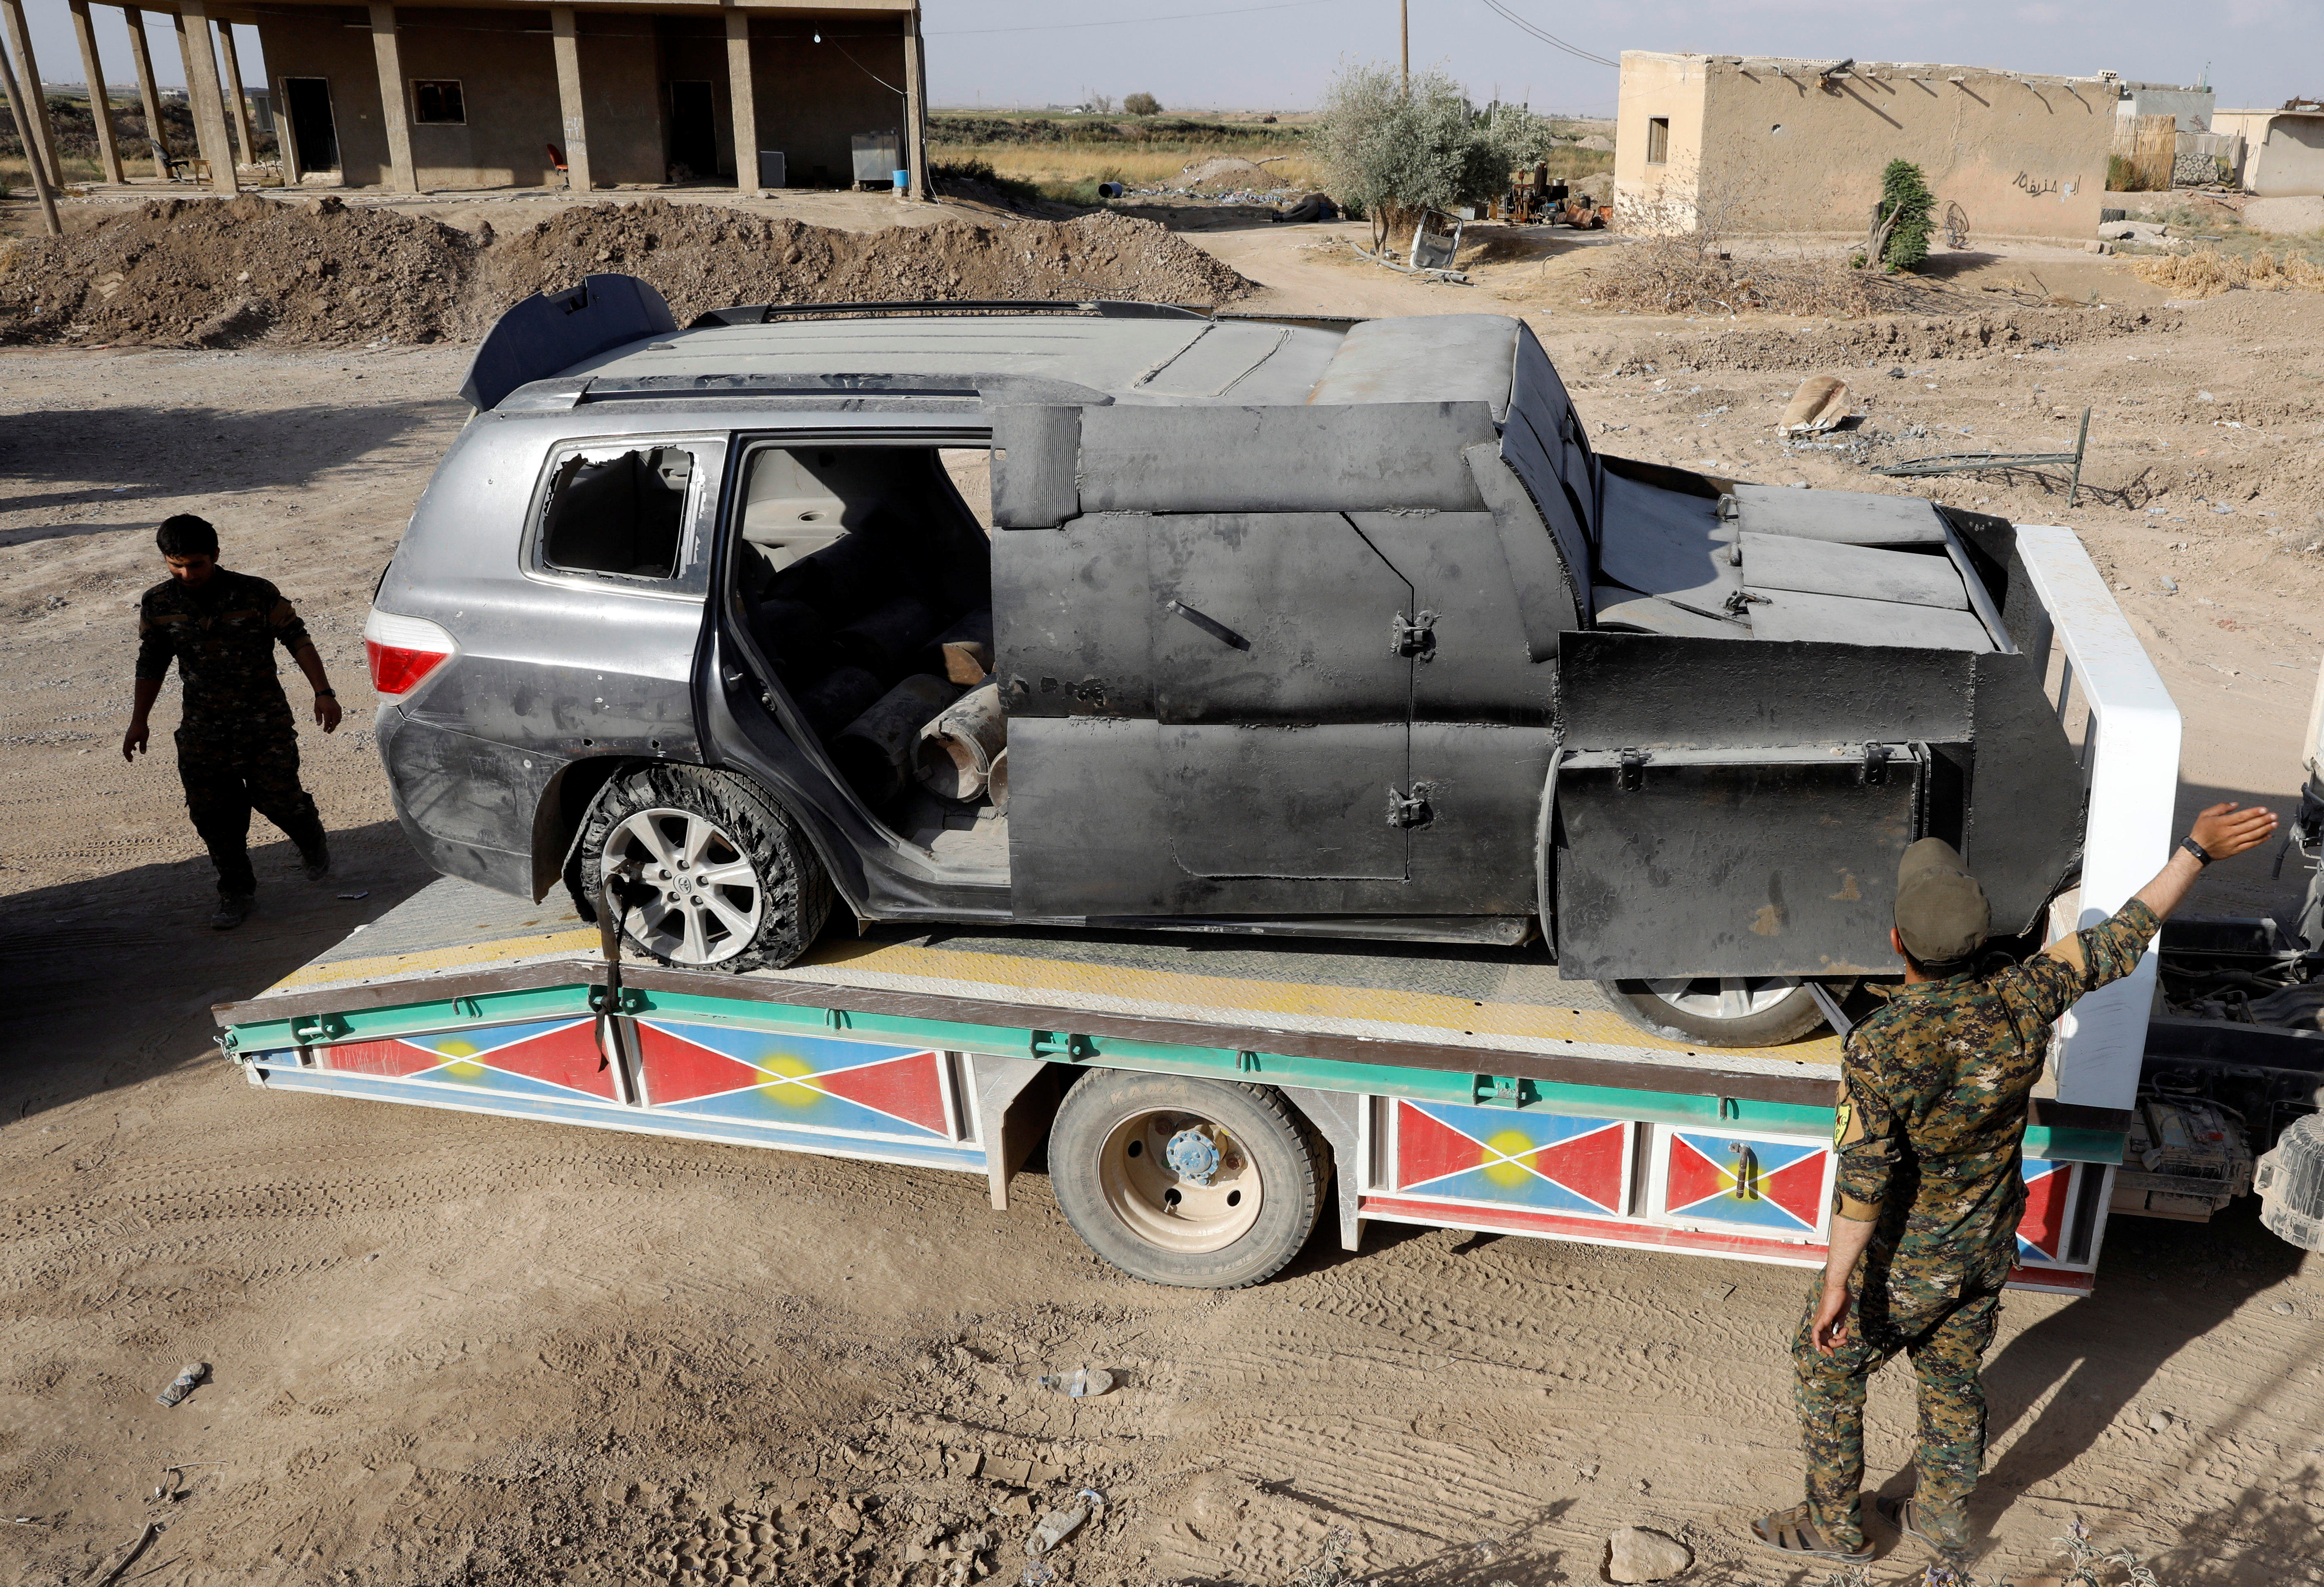 Members of Syrian Democratic Forces transport a suicide car bomb used by the Islamic State militants in Raqqa